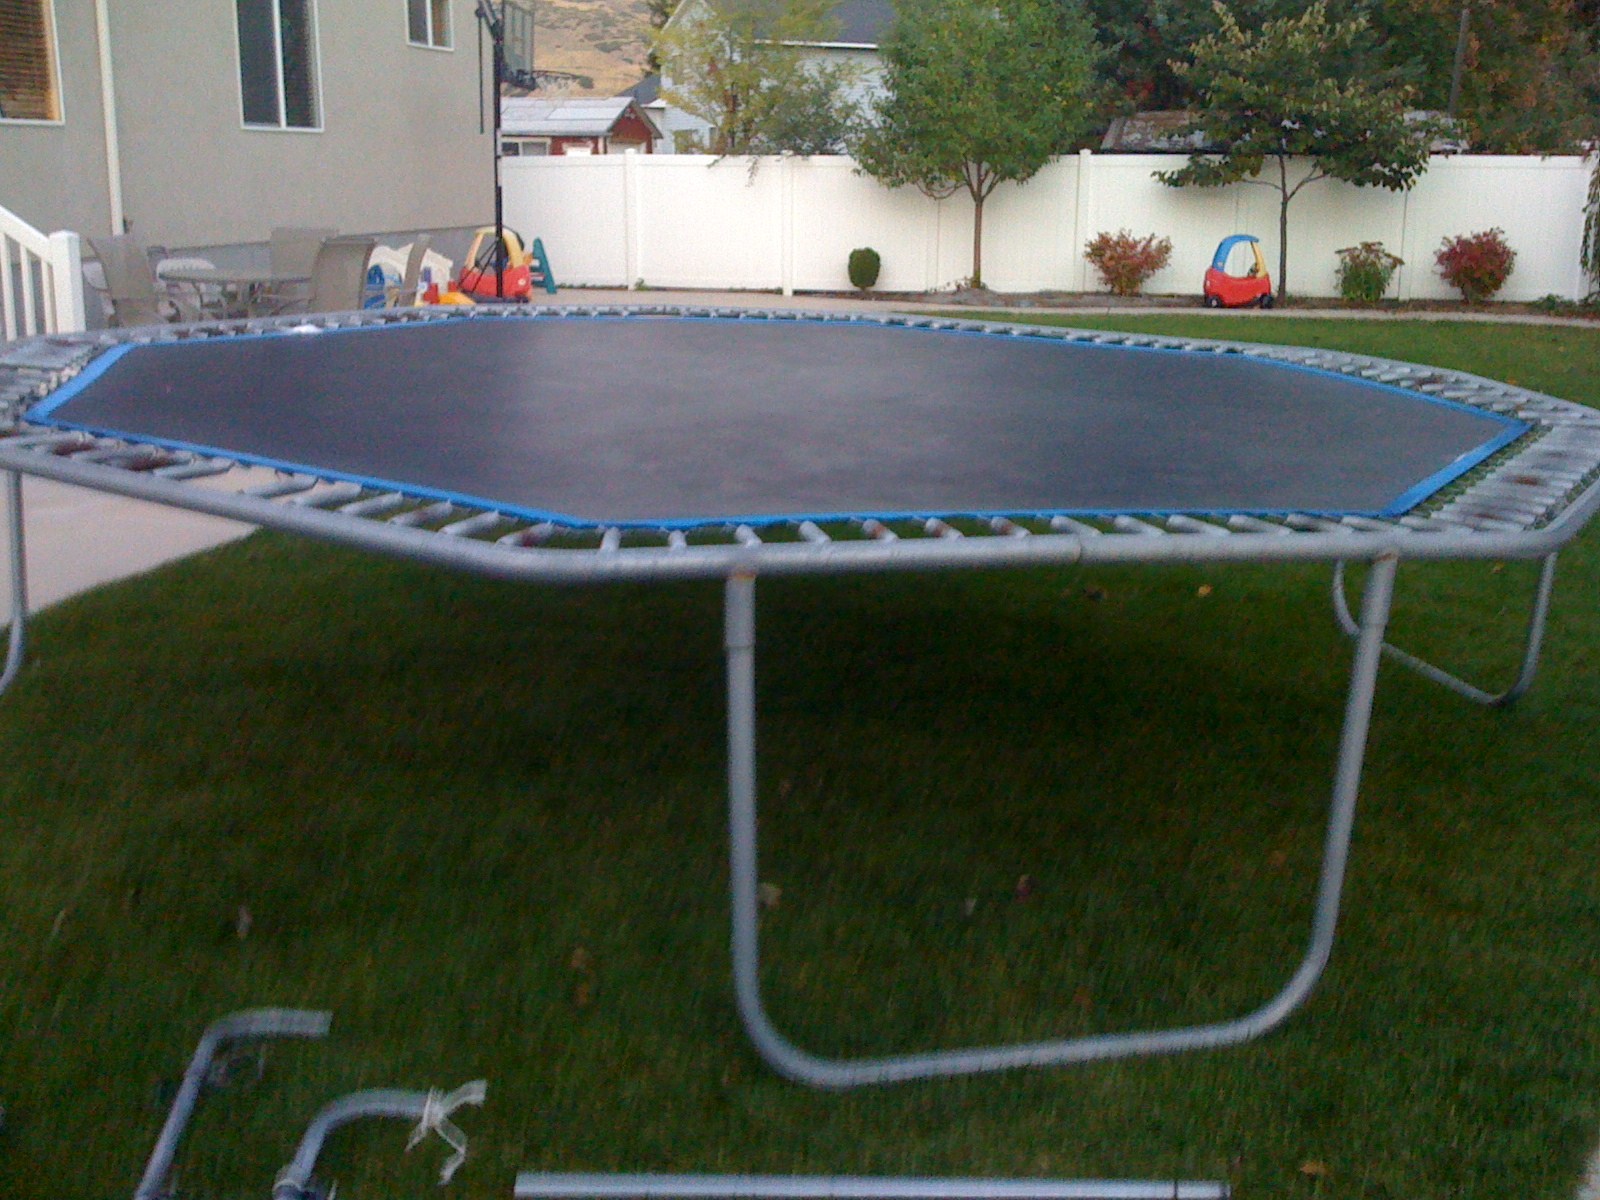 trampolines are safer with few parts